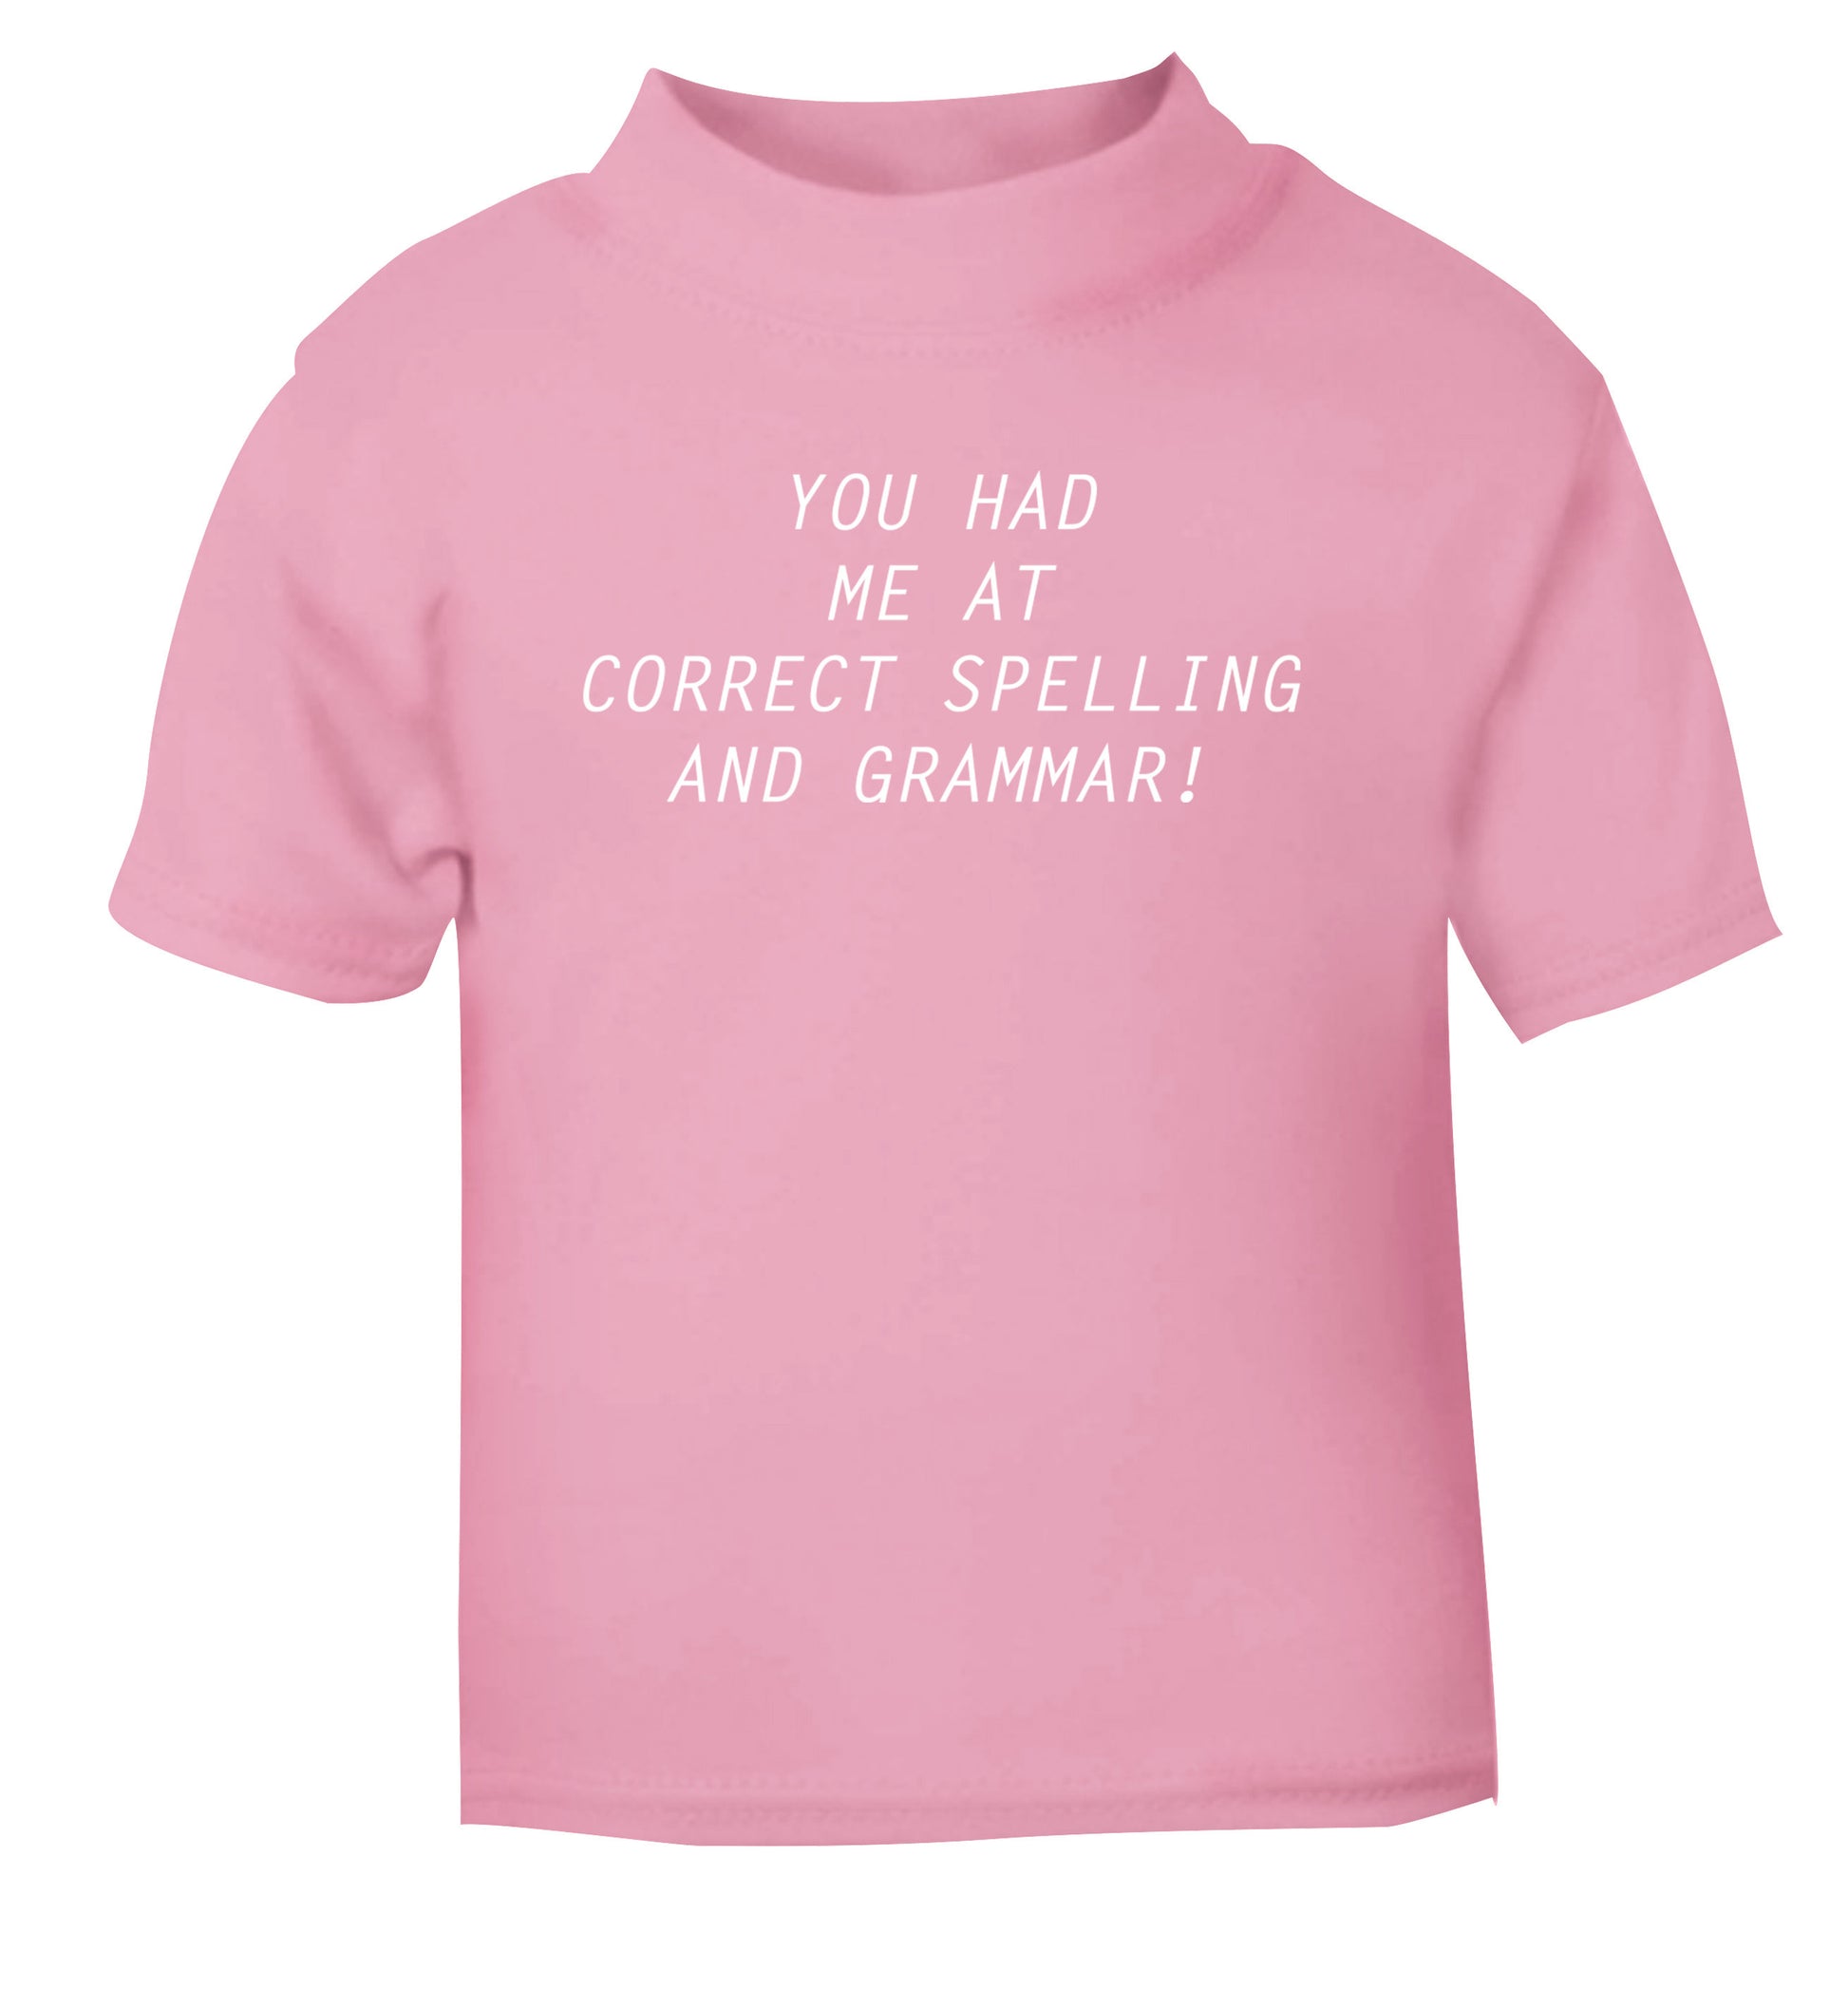 You had me at correct spelling and grammar light pink Baby Toddler Tshirt 2 Years